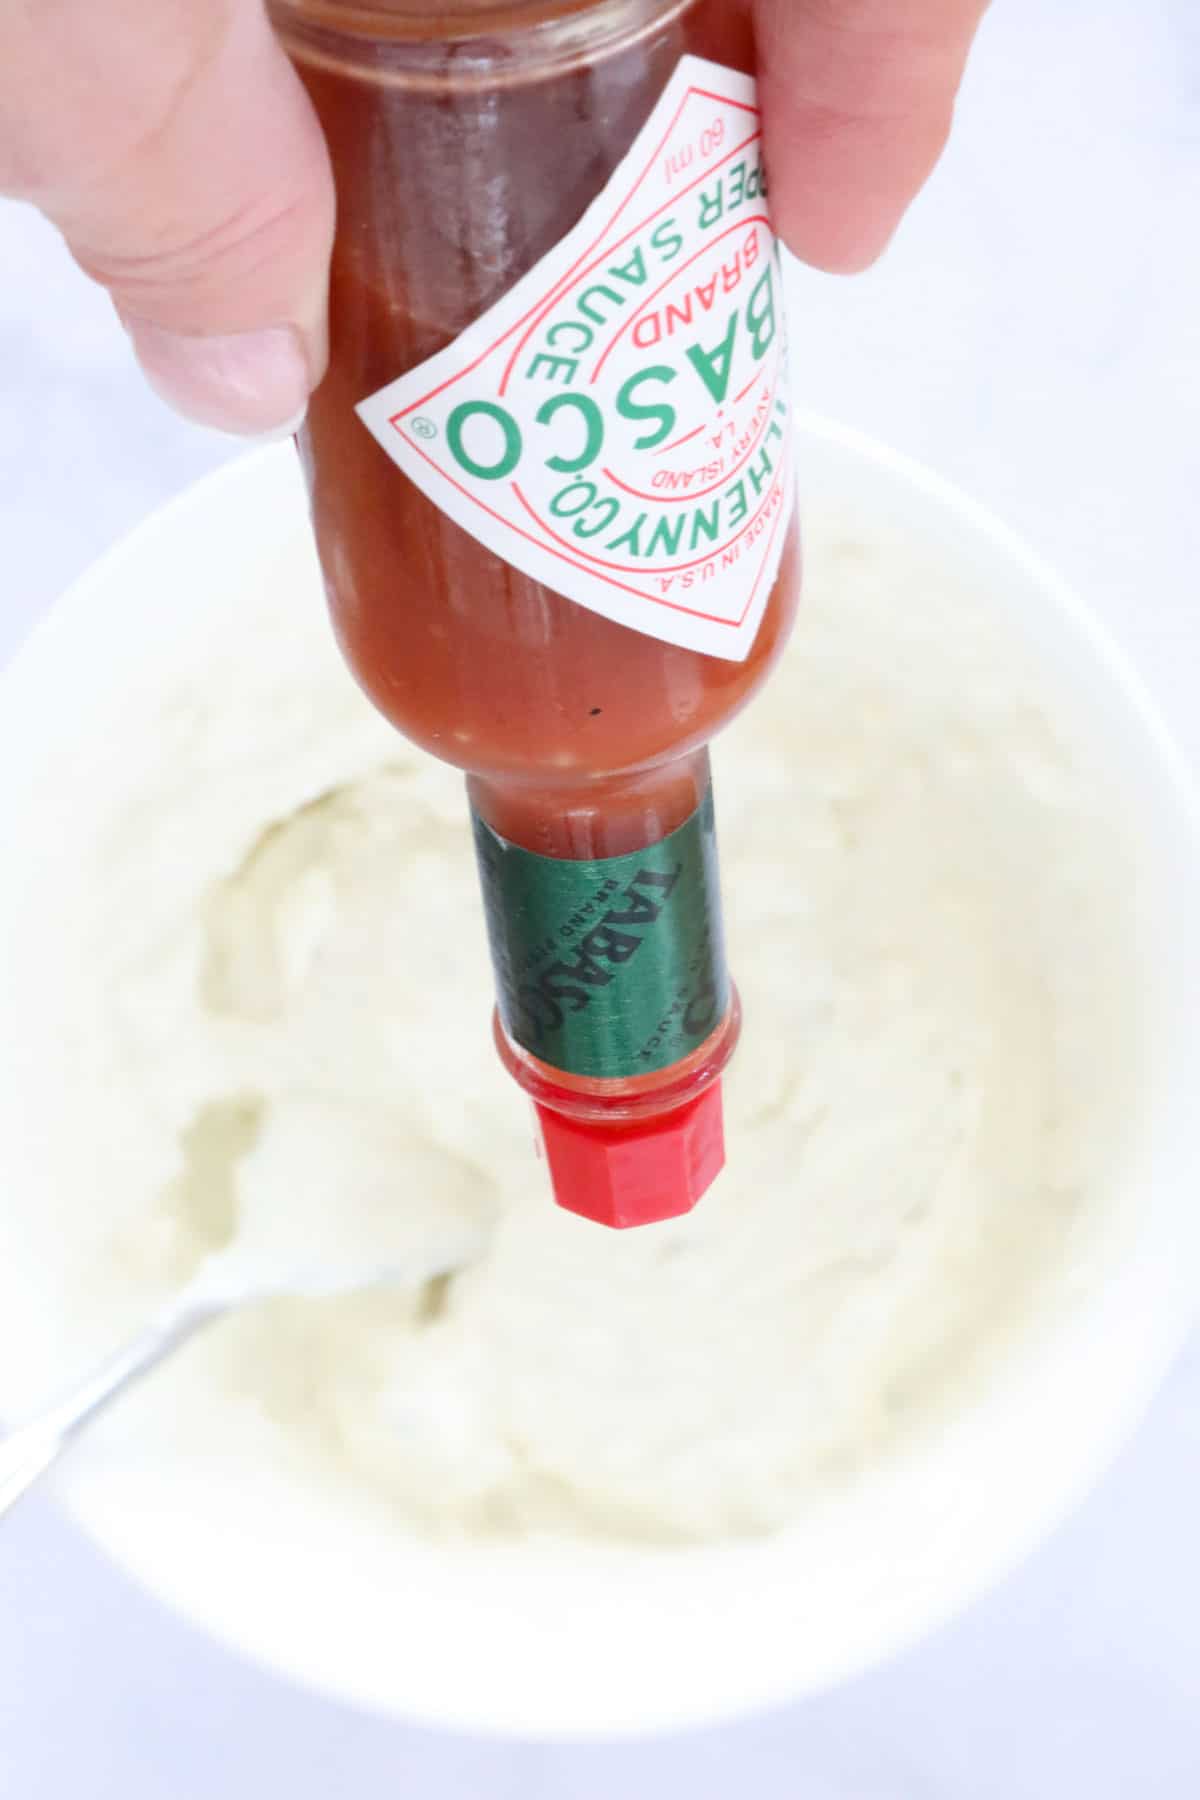 A bottle of Tabasco held upside down over the mixing bowl.